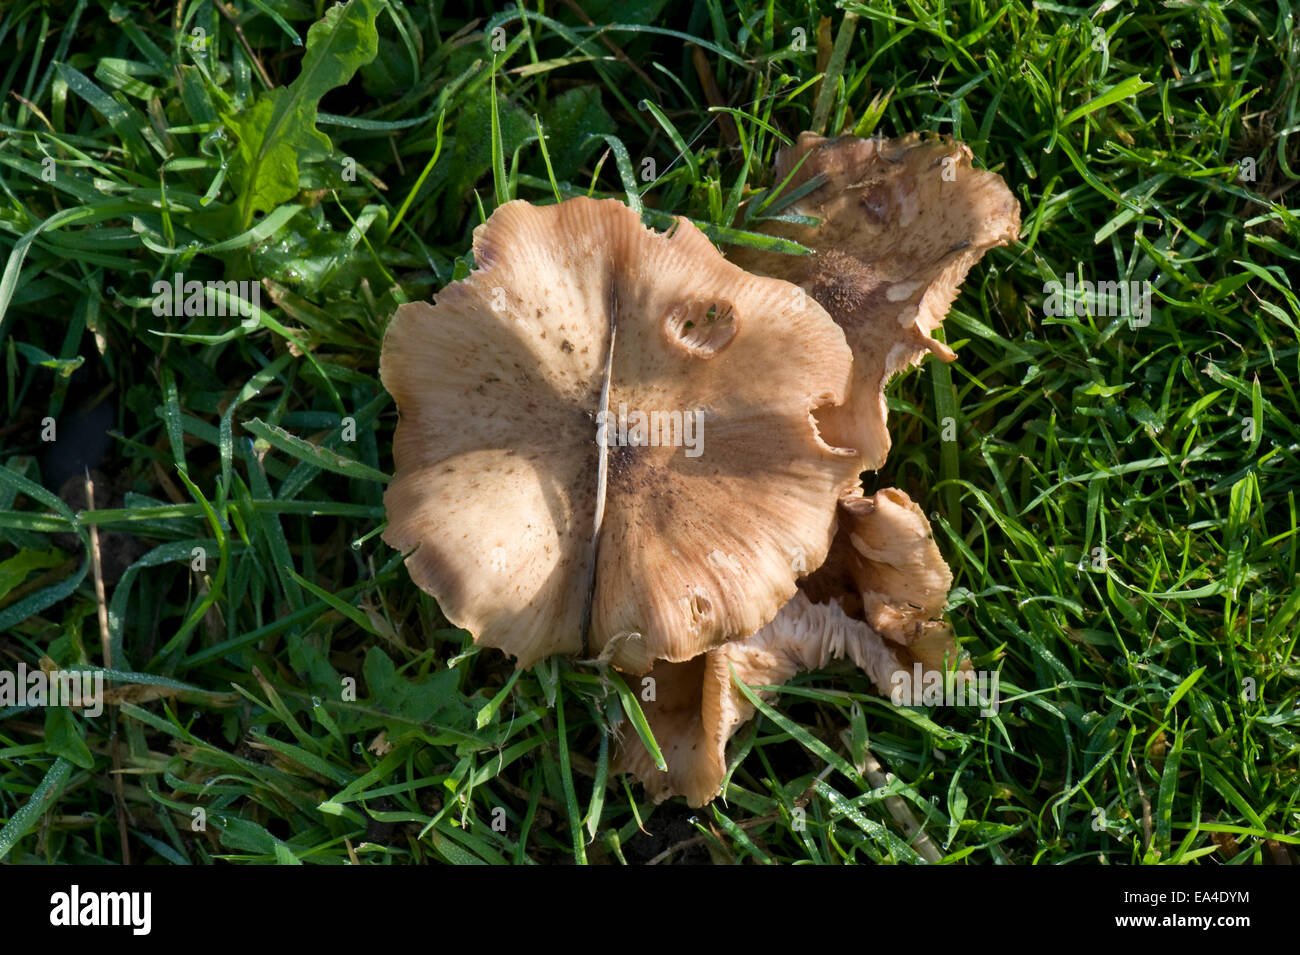 Fruiting body of honey fungus, Armillaria mellea, spreading out inton grass from around the base of an old diseased tree stump i Stock Photo